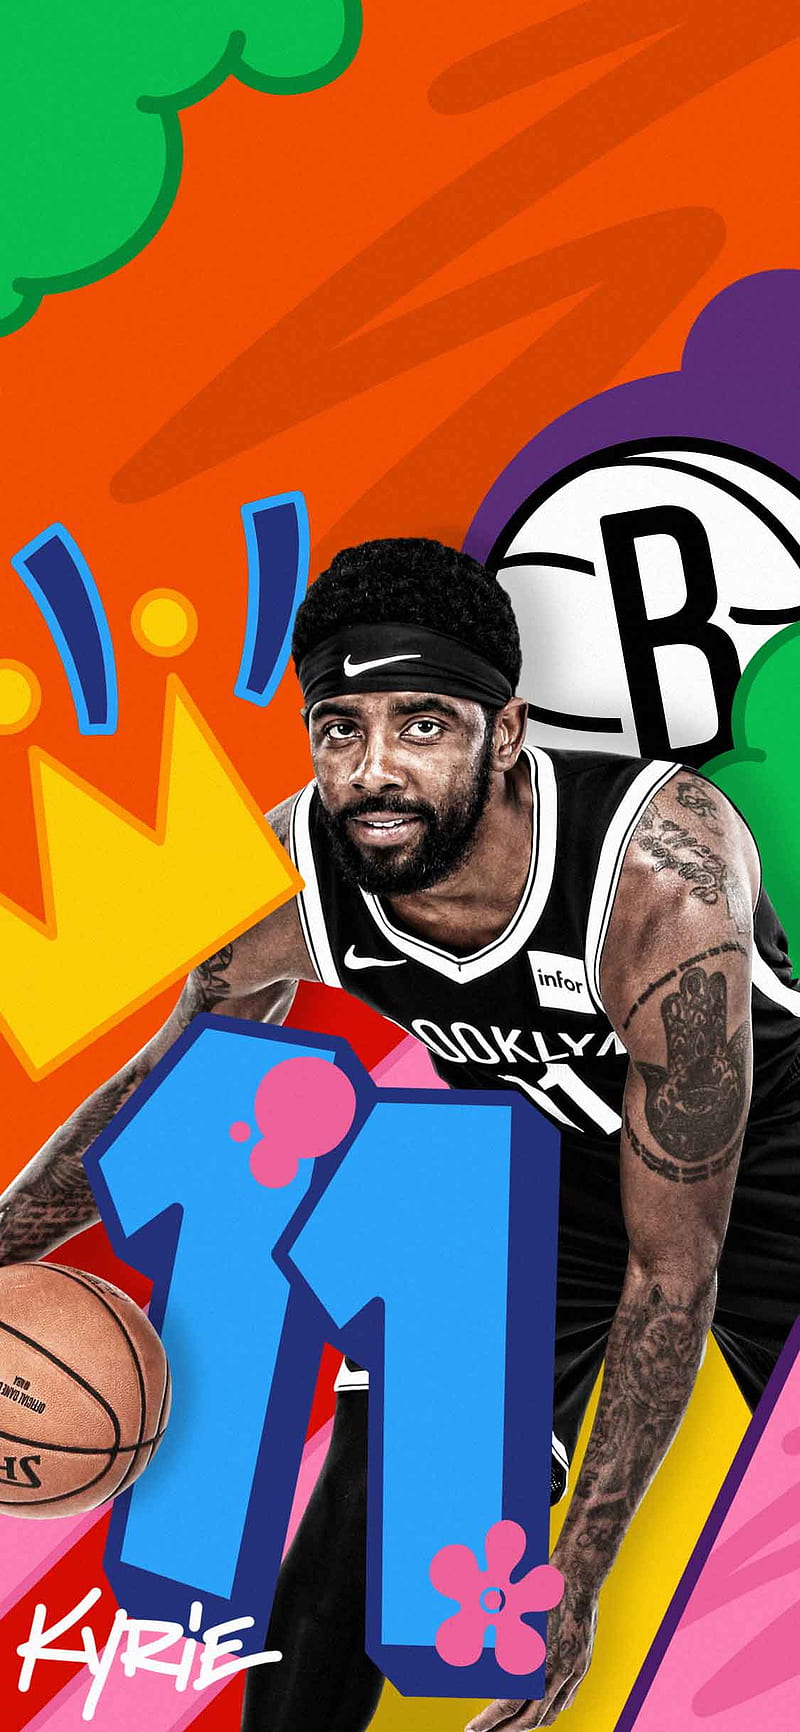 Share 74 Kyrie Irving Wallpaper Nets Latest Incdgdbentre